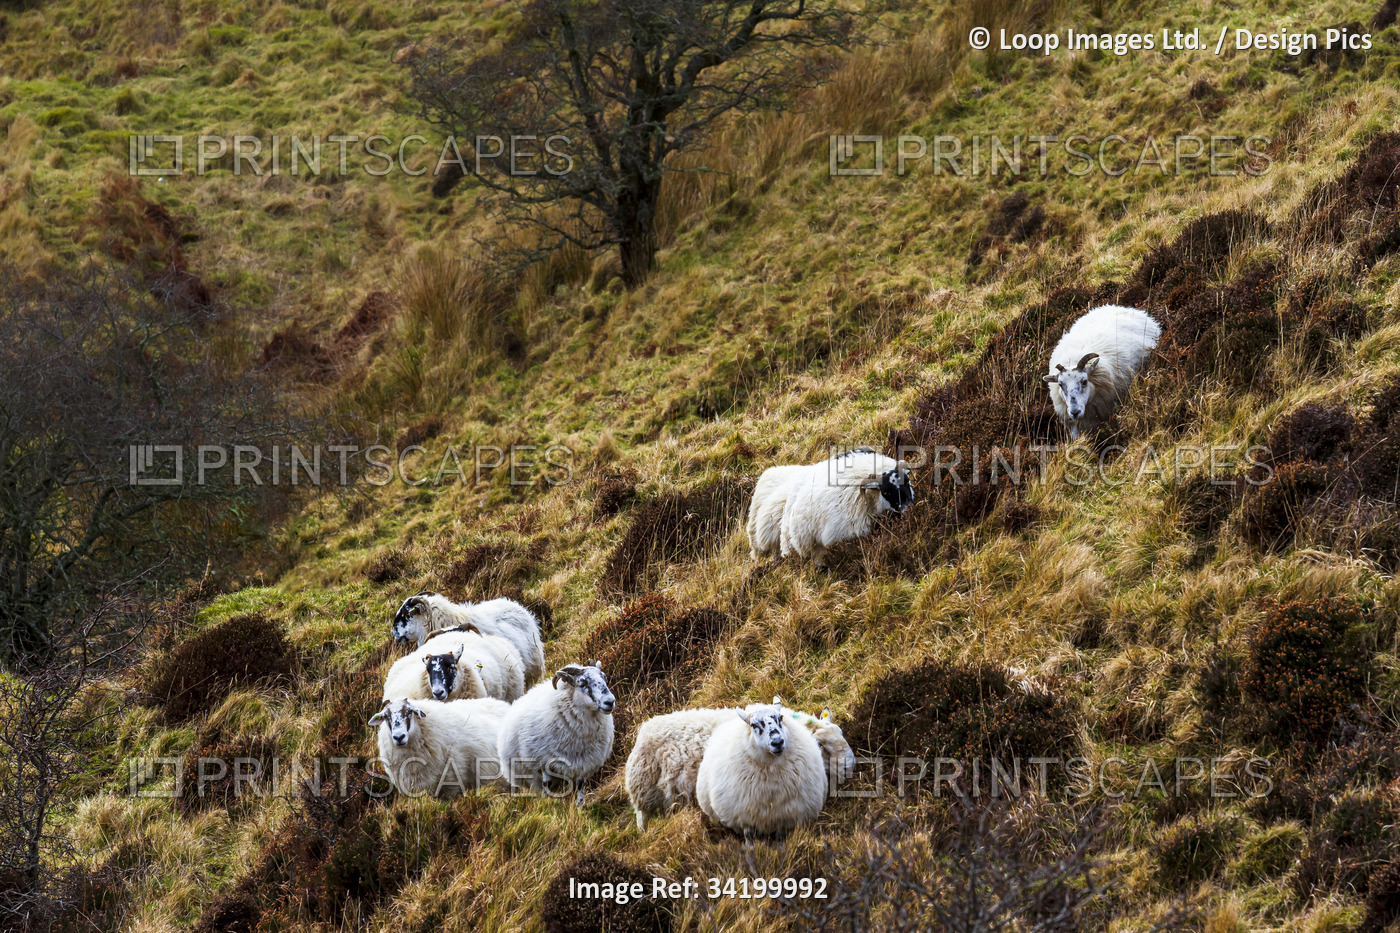 A shepherd and his sheep in the hills on the Isle of Skye.